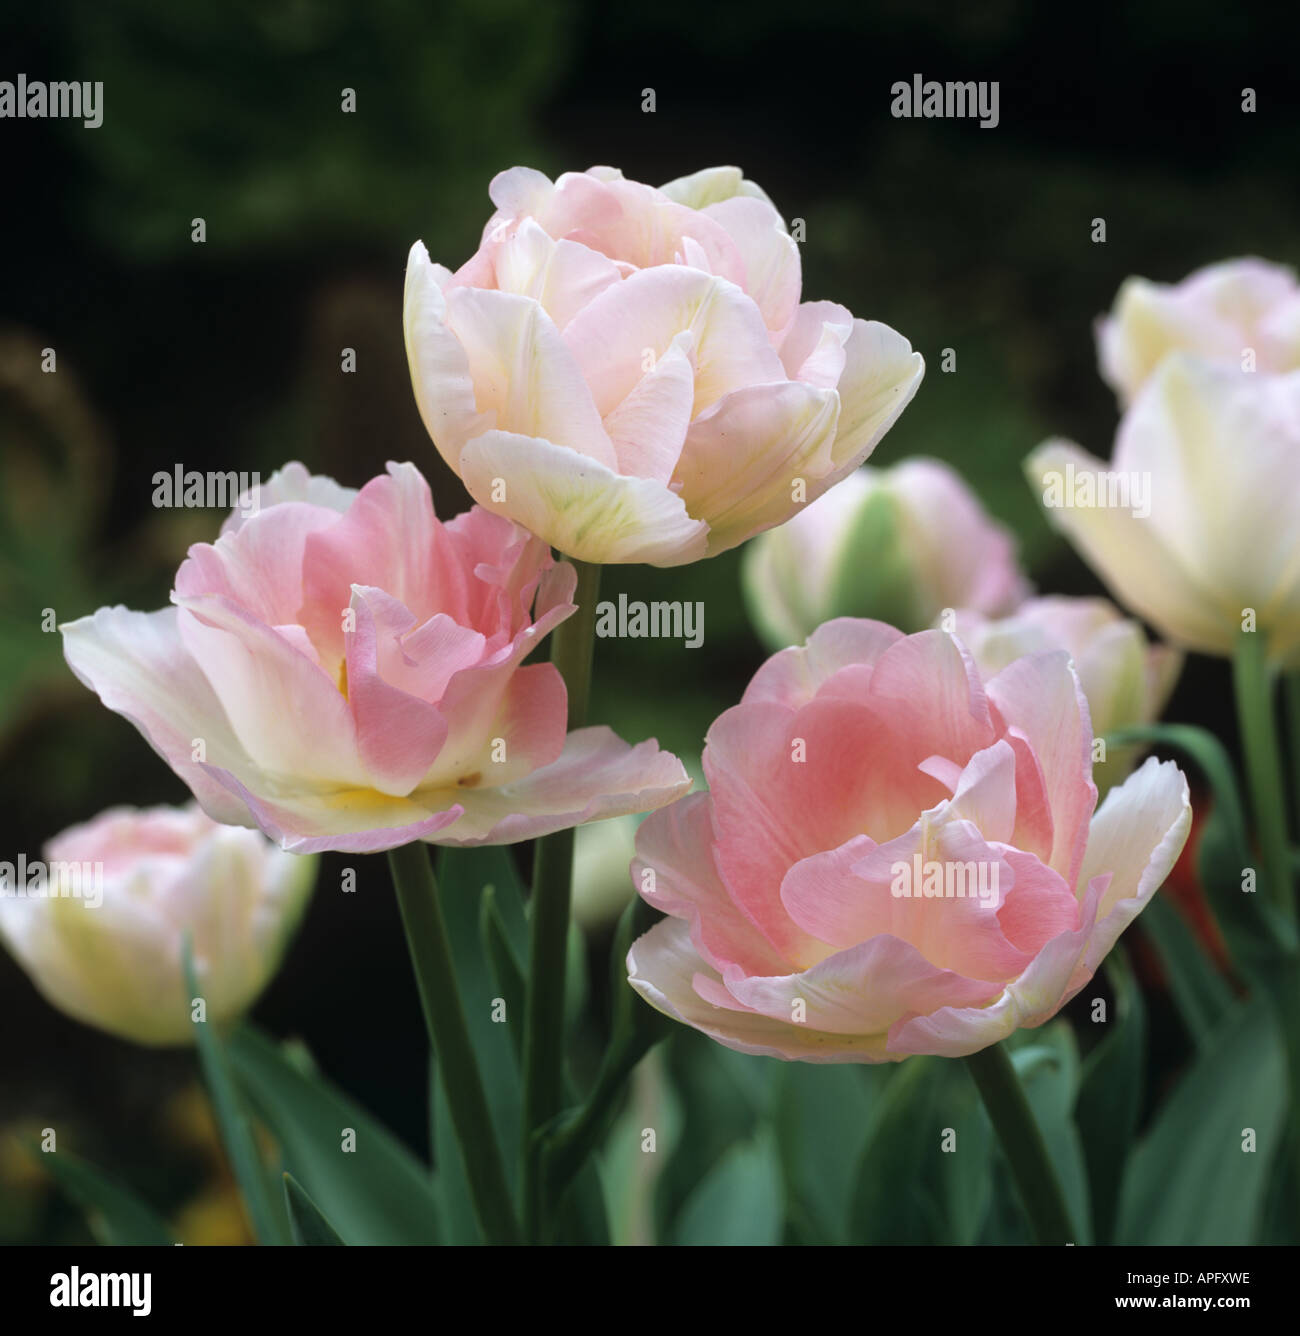 Flowers of tulip Angelique a pale pink double tulip Stock Photo